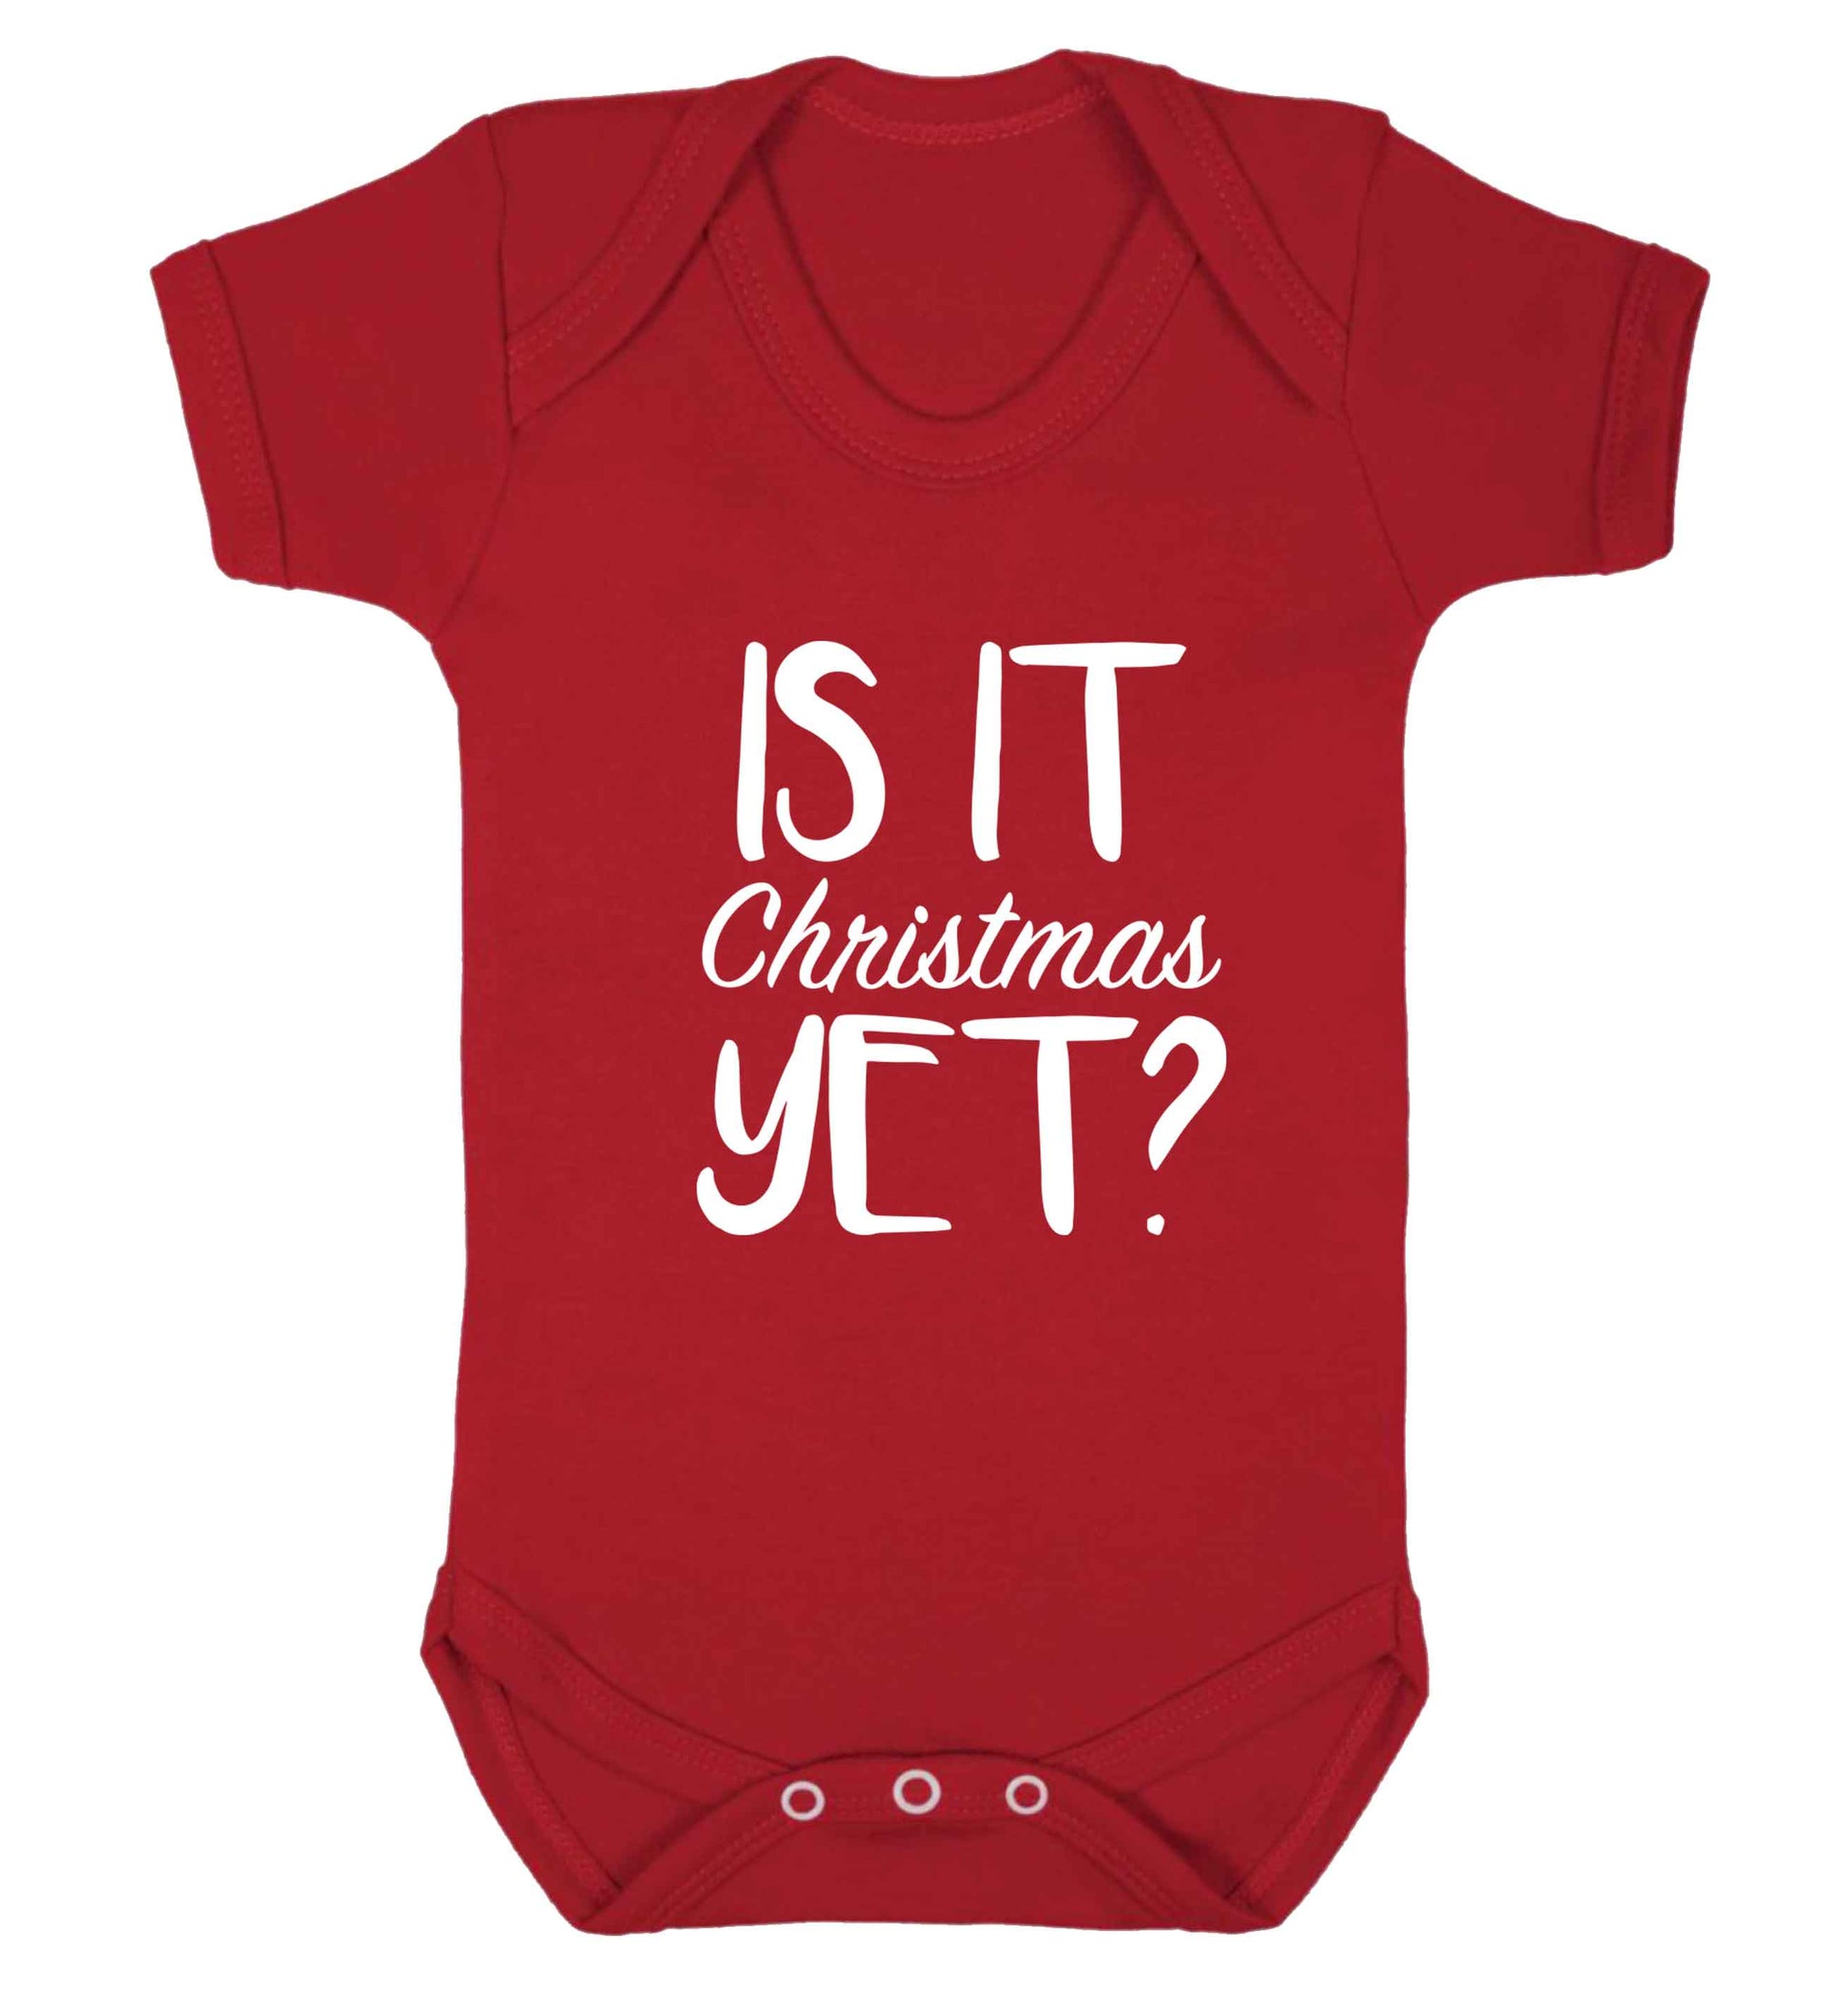 Is it Christmas yet? baby vest red 18-24 months